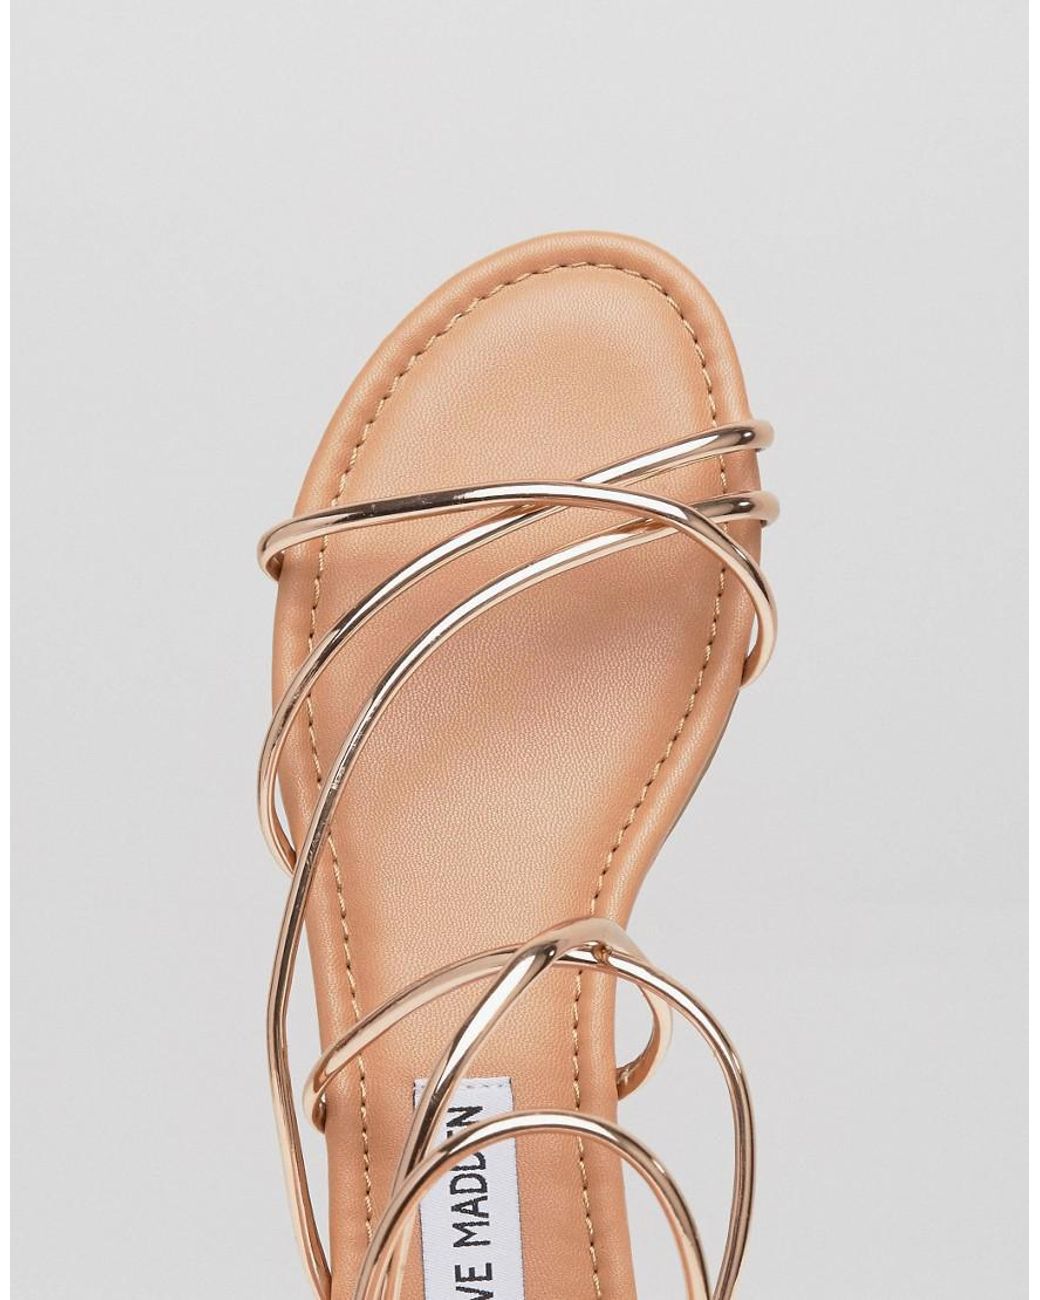 Steve Madden Sapphire Rose Gold Strappy Flat Sandals in Metallic | Lyst  Canada